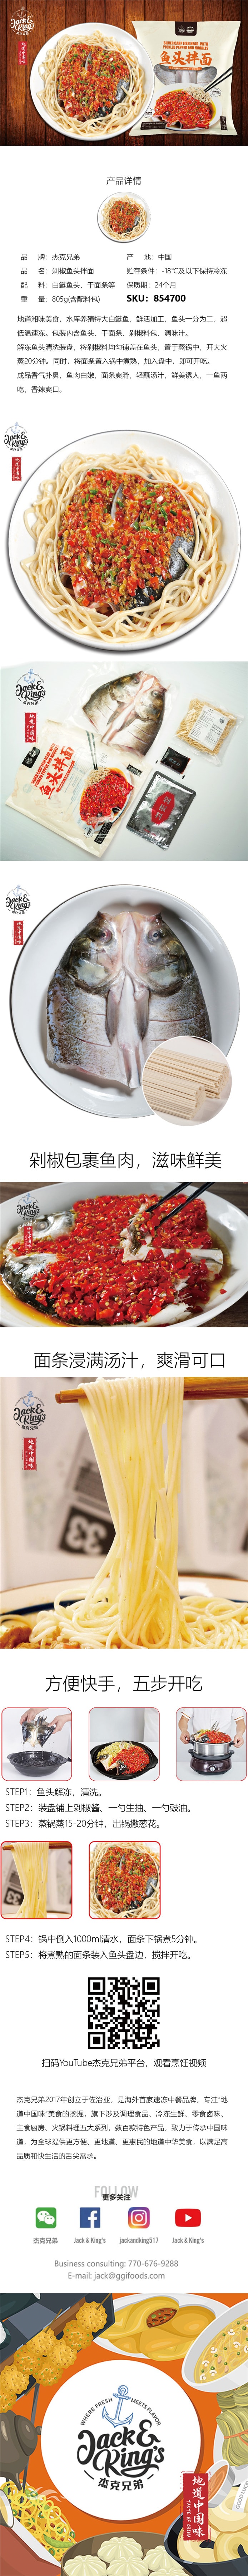 Taste of China Silver Carp Fish Head With Pickled Pepper And Noodles 805g